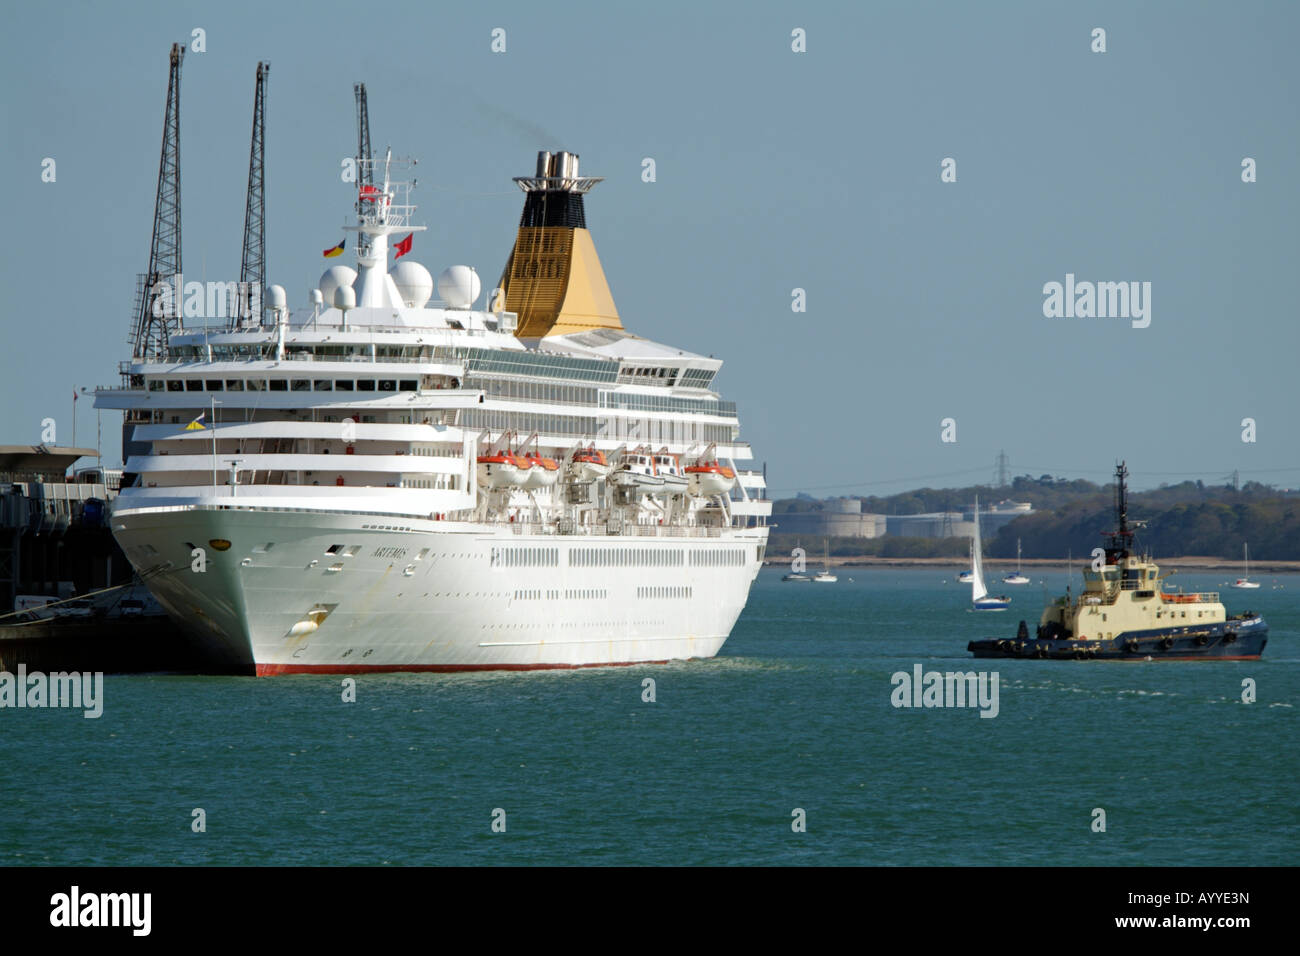 Artemis Cruise Ship Alongside on the Queen Elizabeth II Terminal in the Port of Southampton England Stock Photo